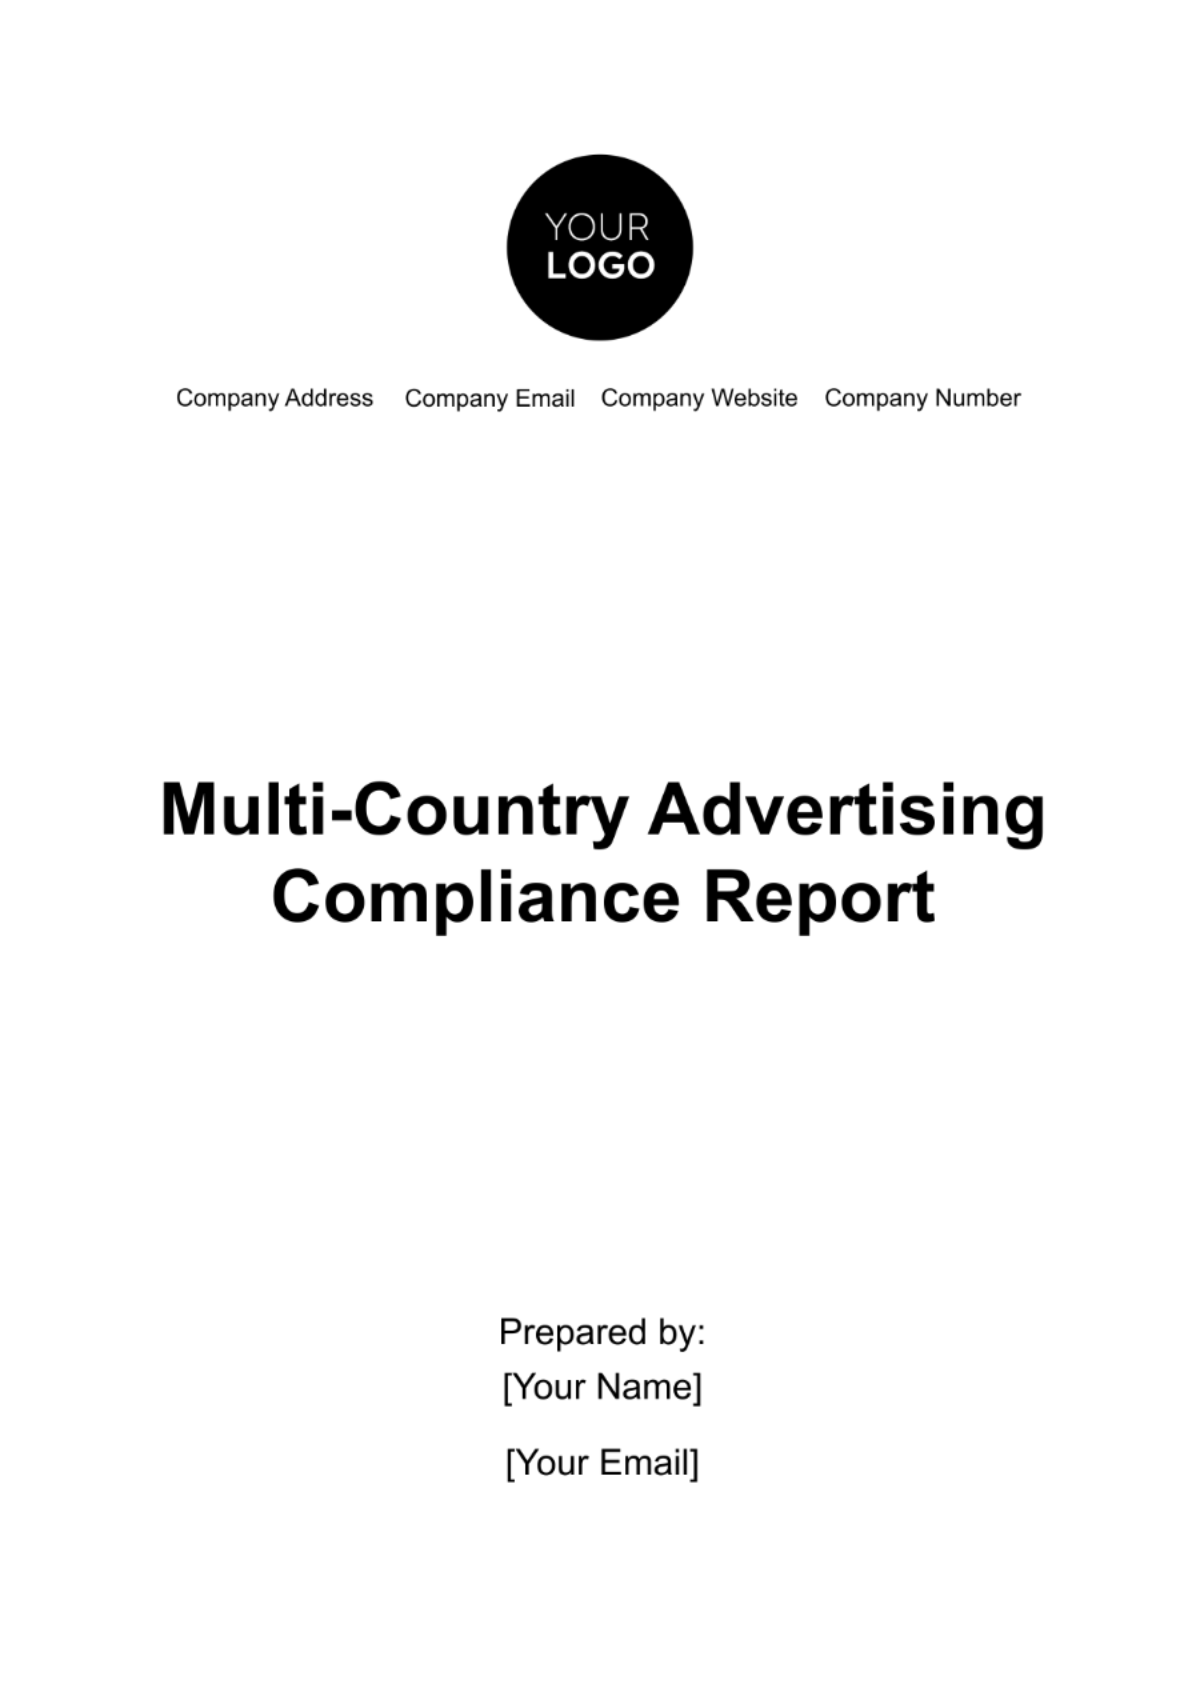 Multi-Country Advertising Compliance Report Template